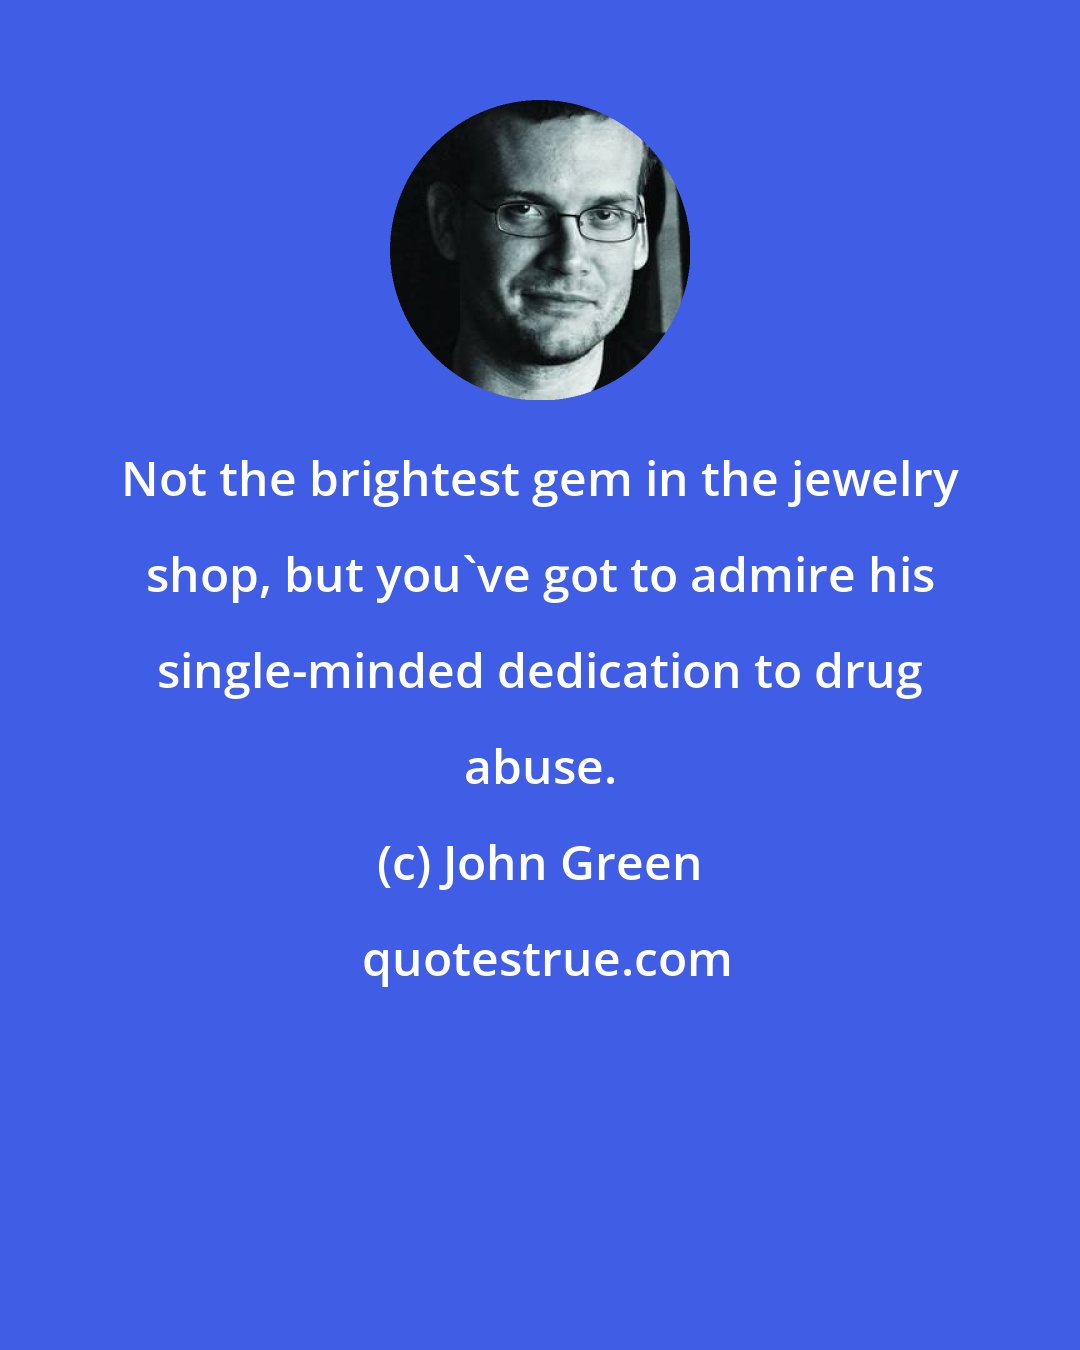 John Green: Not the brightest gem in the jewelry shop, but you've got to admire his single-minded dedication to drug abuse.